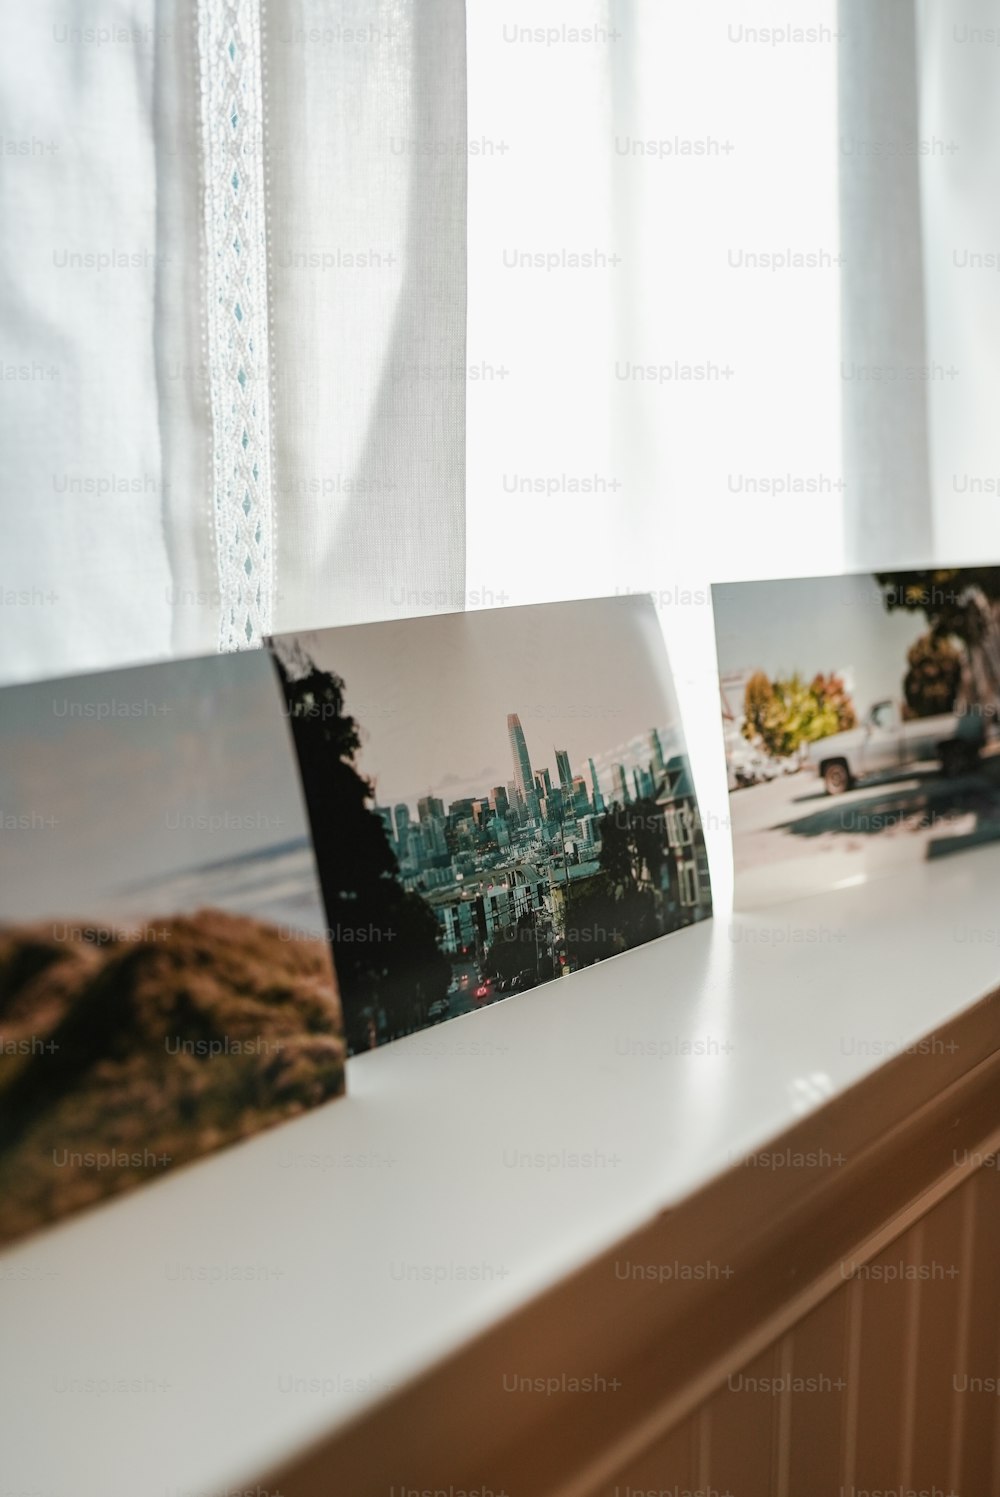 a window sill with three pictures hanging on it